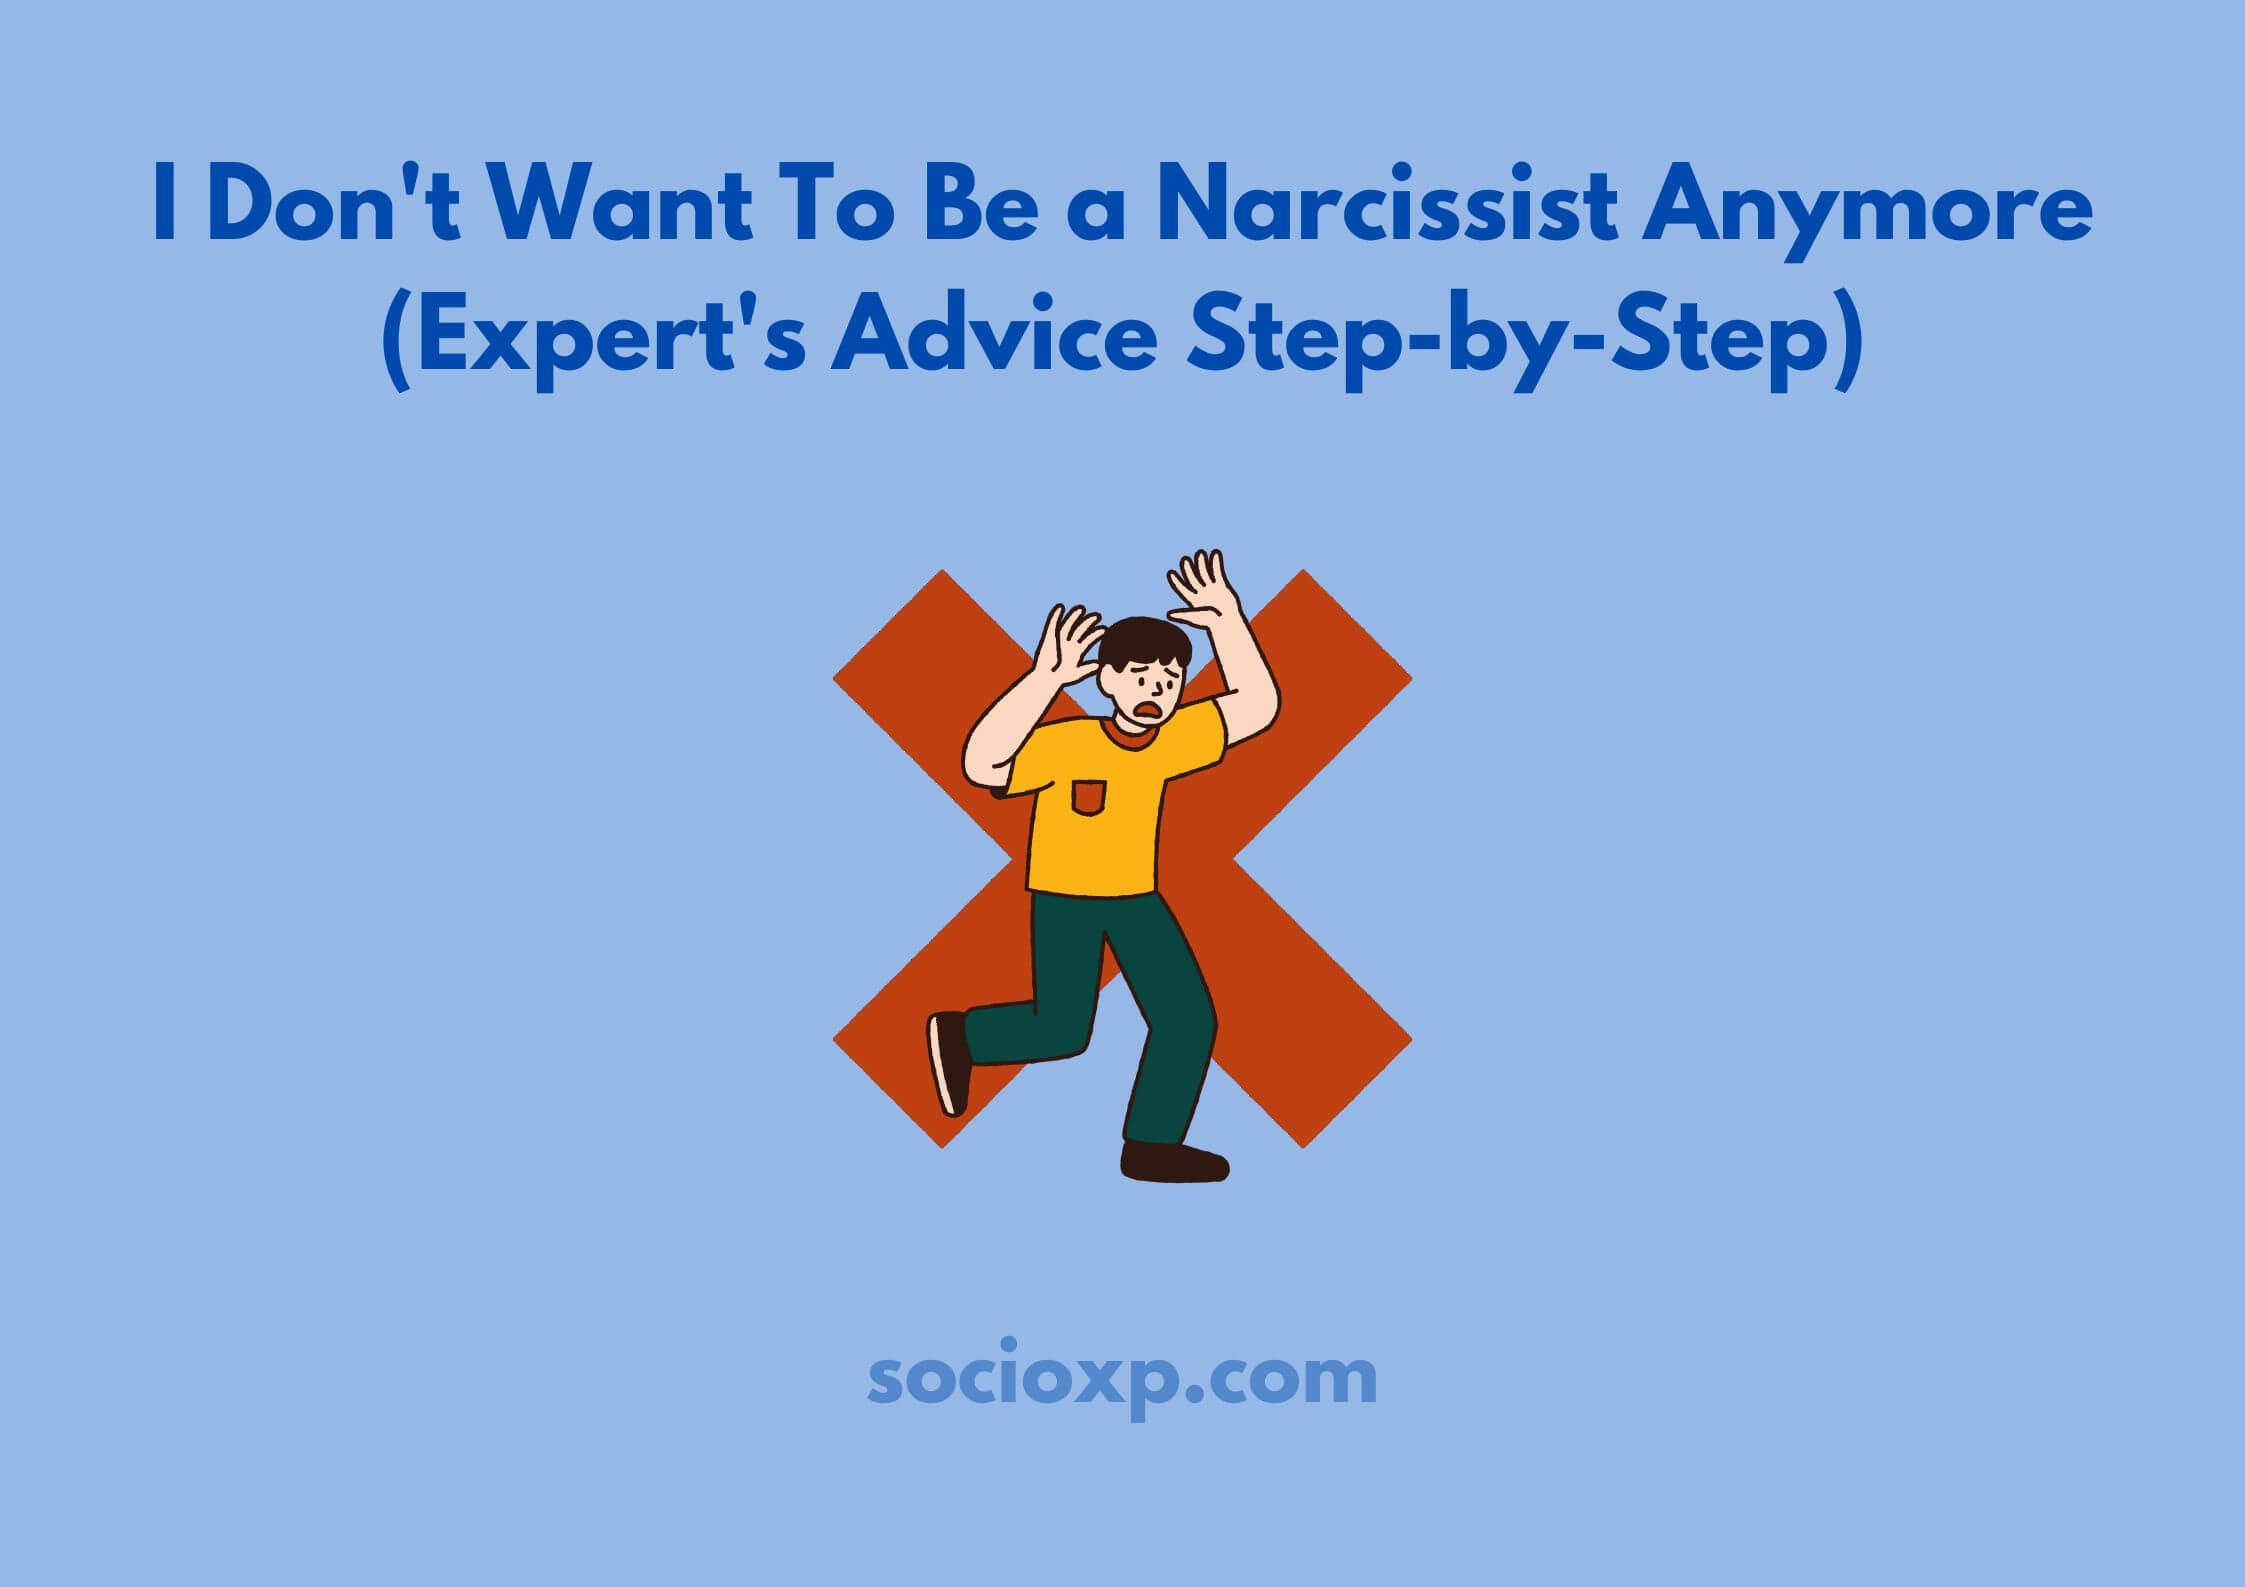 I Don't Want To Be a Narcissist Anymore (Expert's Advice Step-by-Step)